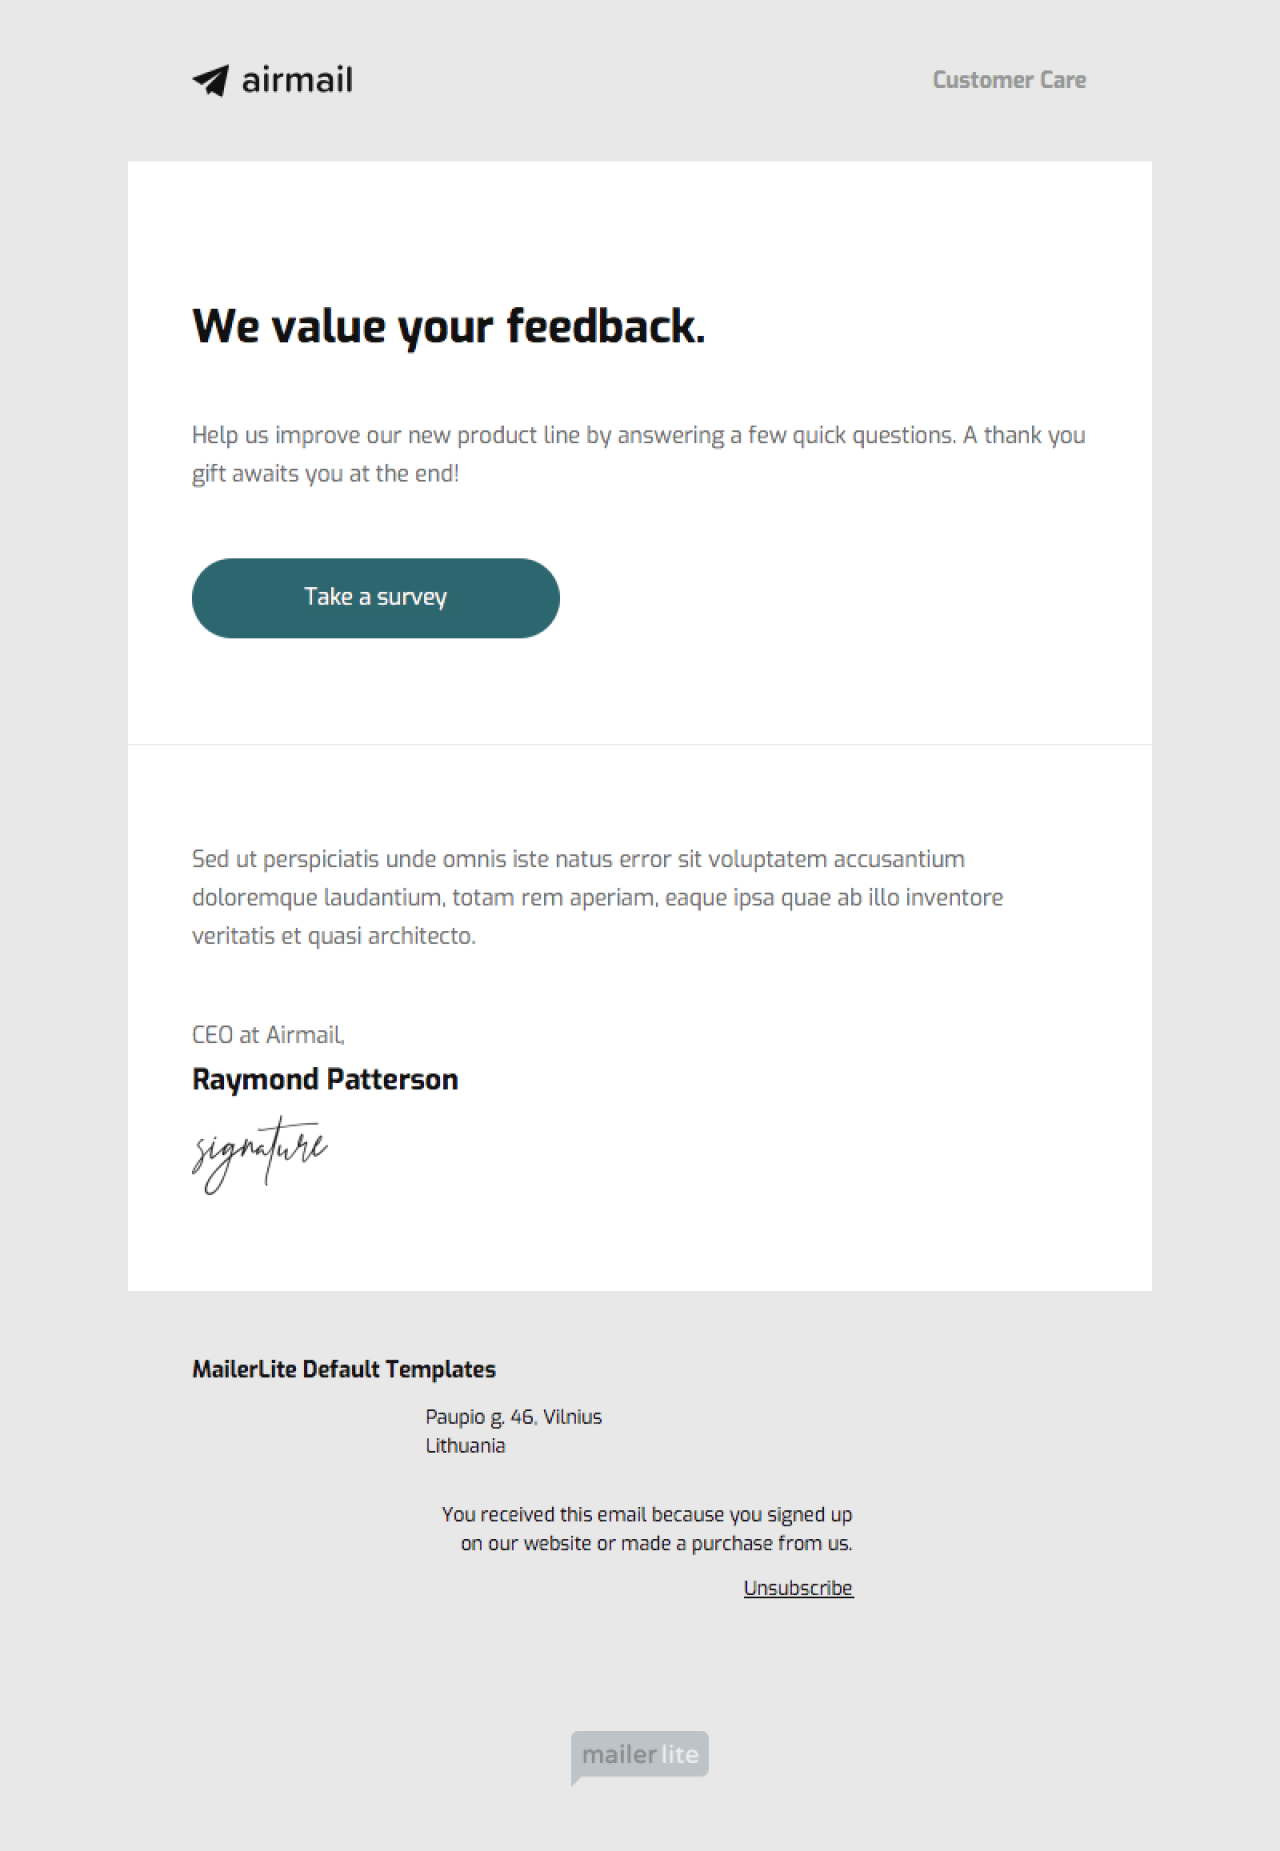 Feedback example - Made with MailerLite